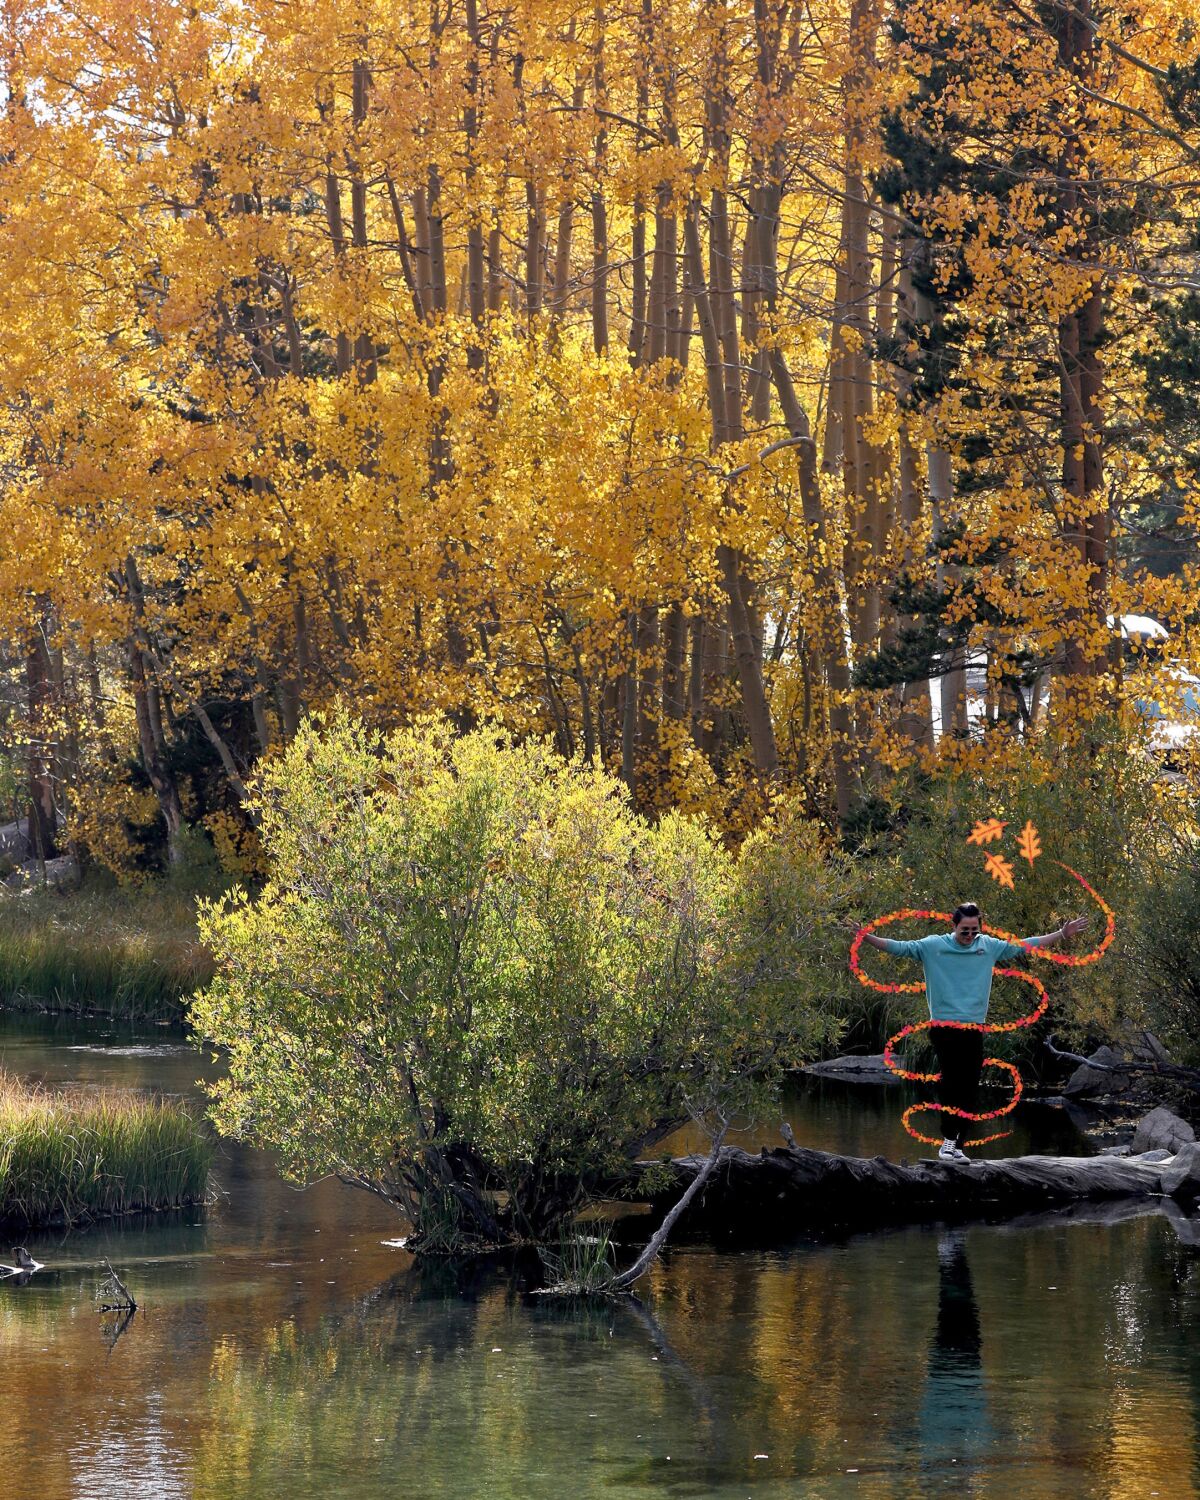 Visitors to the Lake Sabrina area in the Inyo National Forest pose for photos with colorful fall foliage.